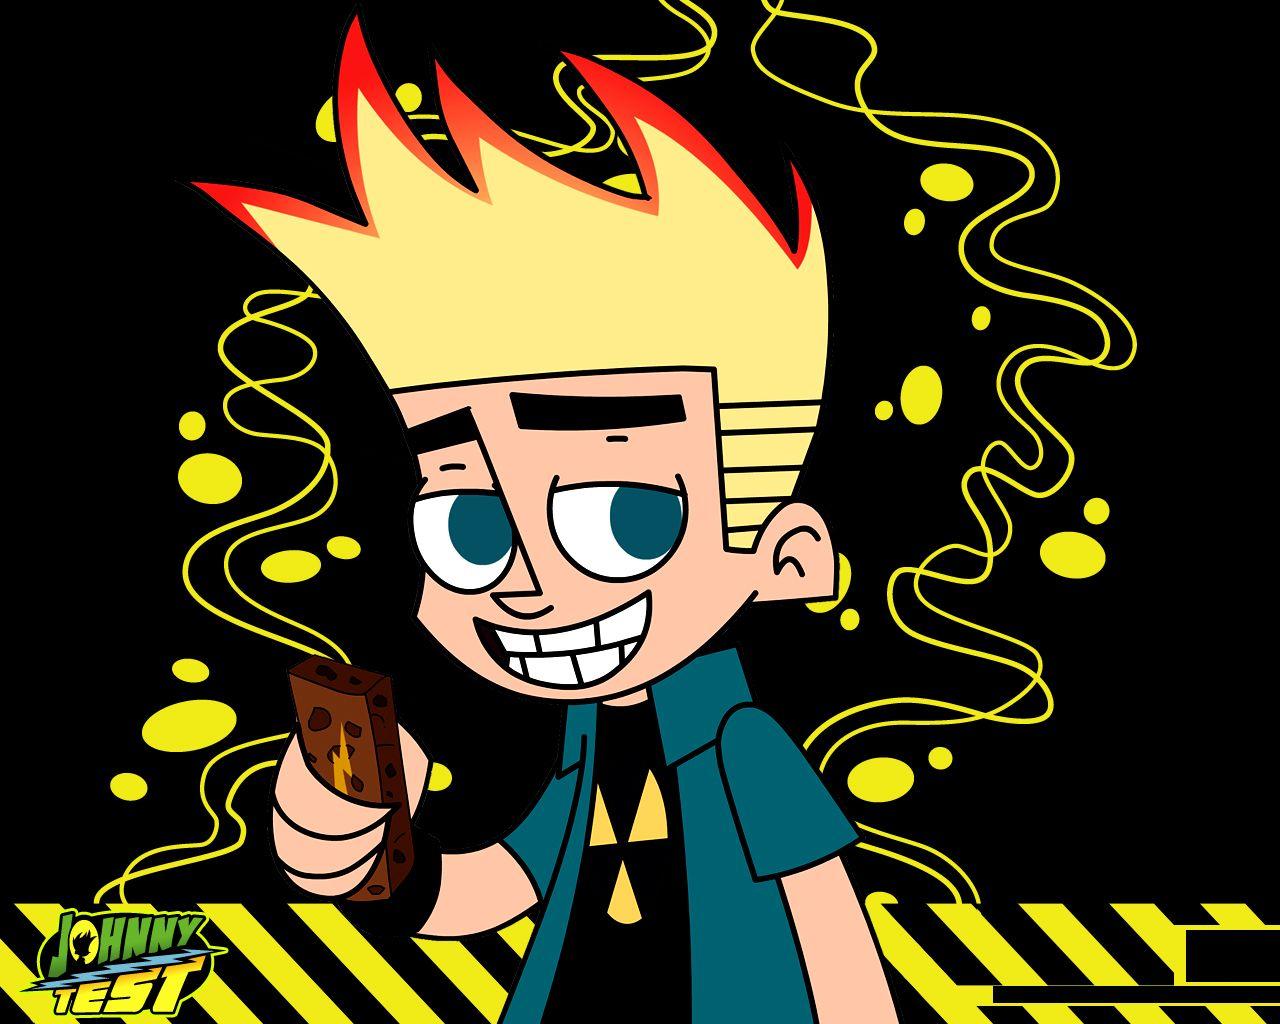 Index of /modules/Wallpapers/gallery/wall1280/variados/johnny_test.